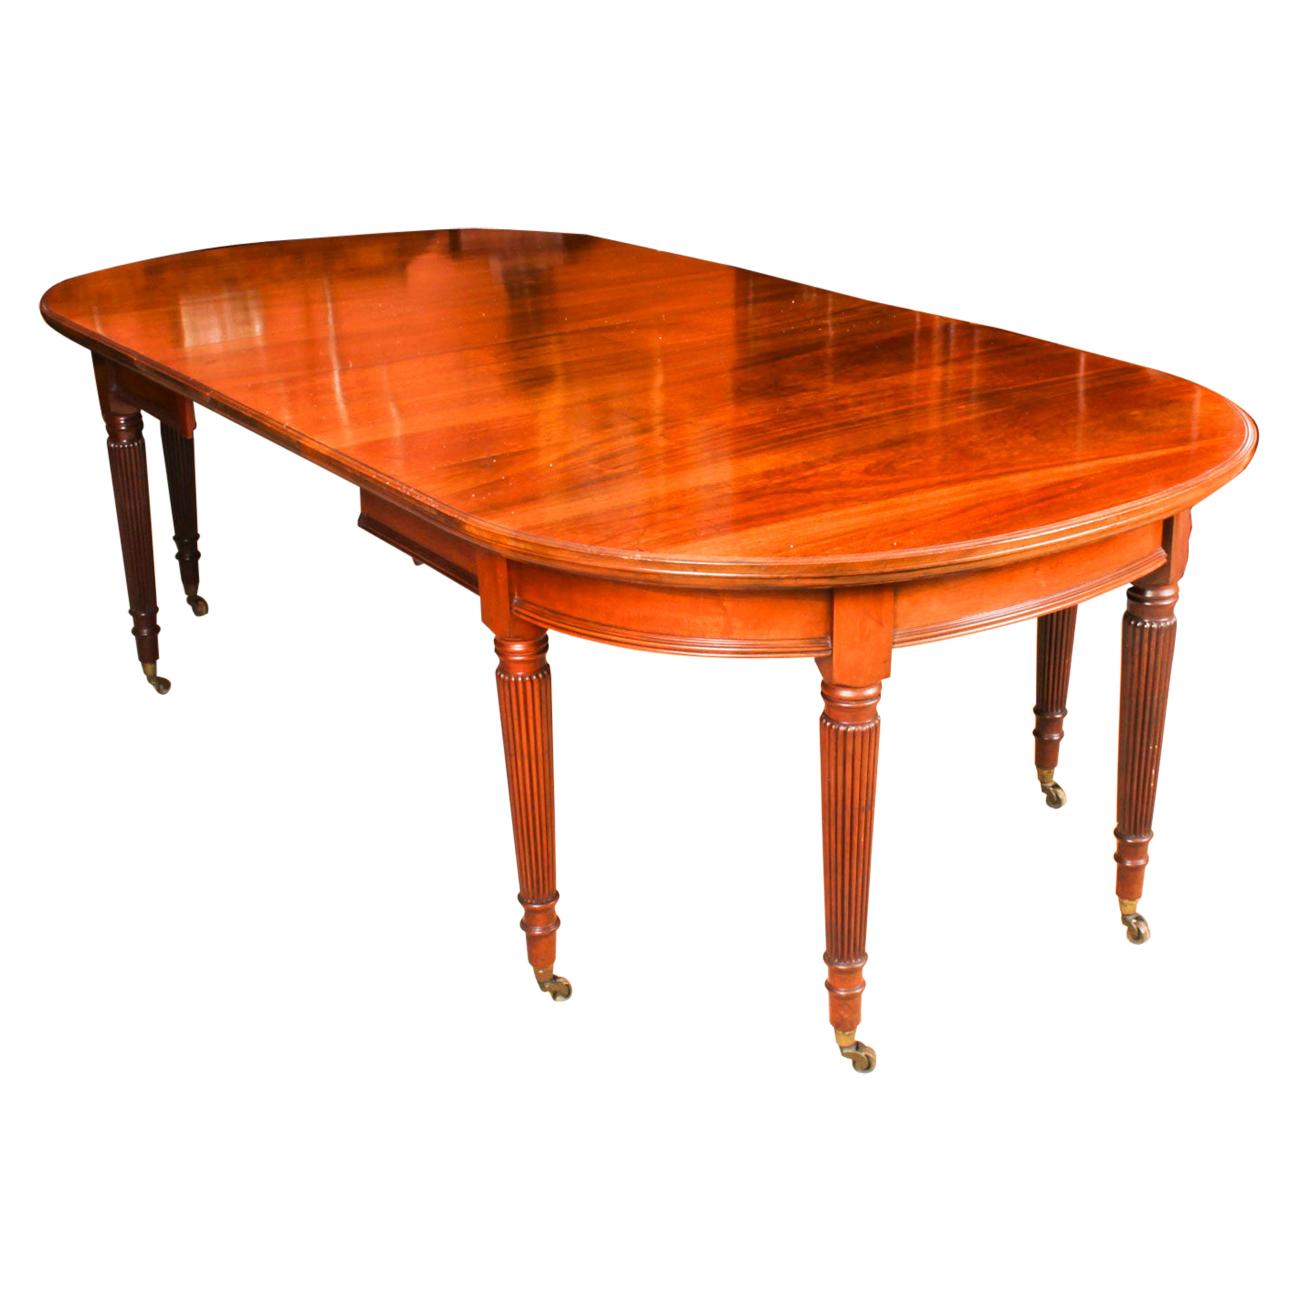 Antique Victorian Flame Mahogany Oval Extending Dining Table, 19th Century